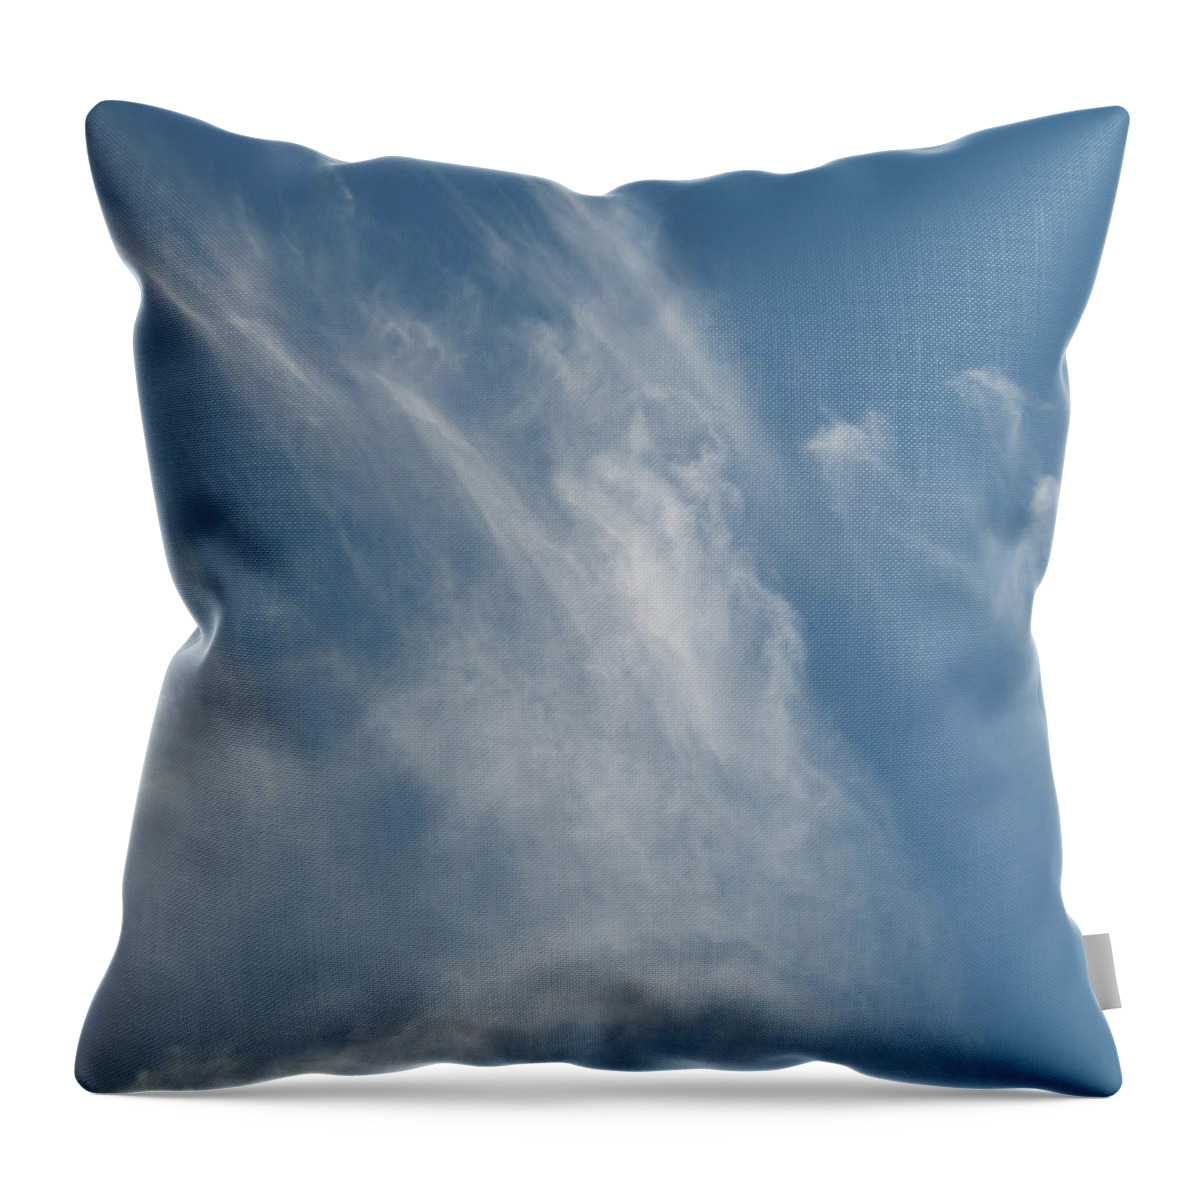 Angels Throw Pillow featuring the photograph Angels In Place by Matthew Seufer